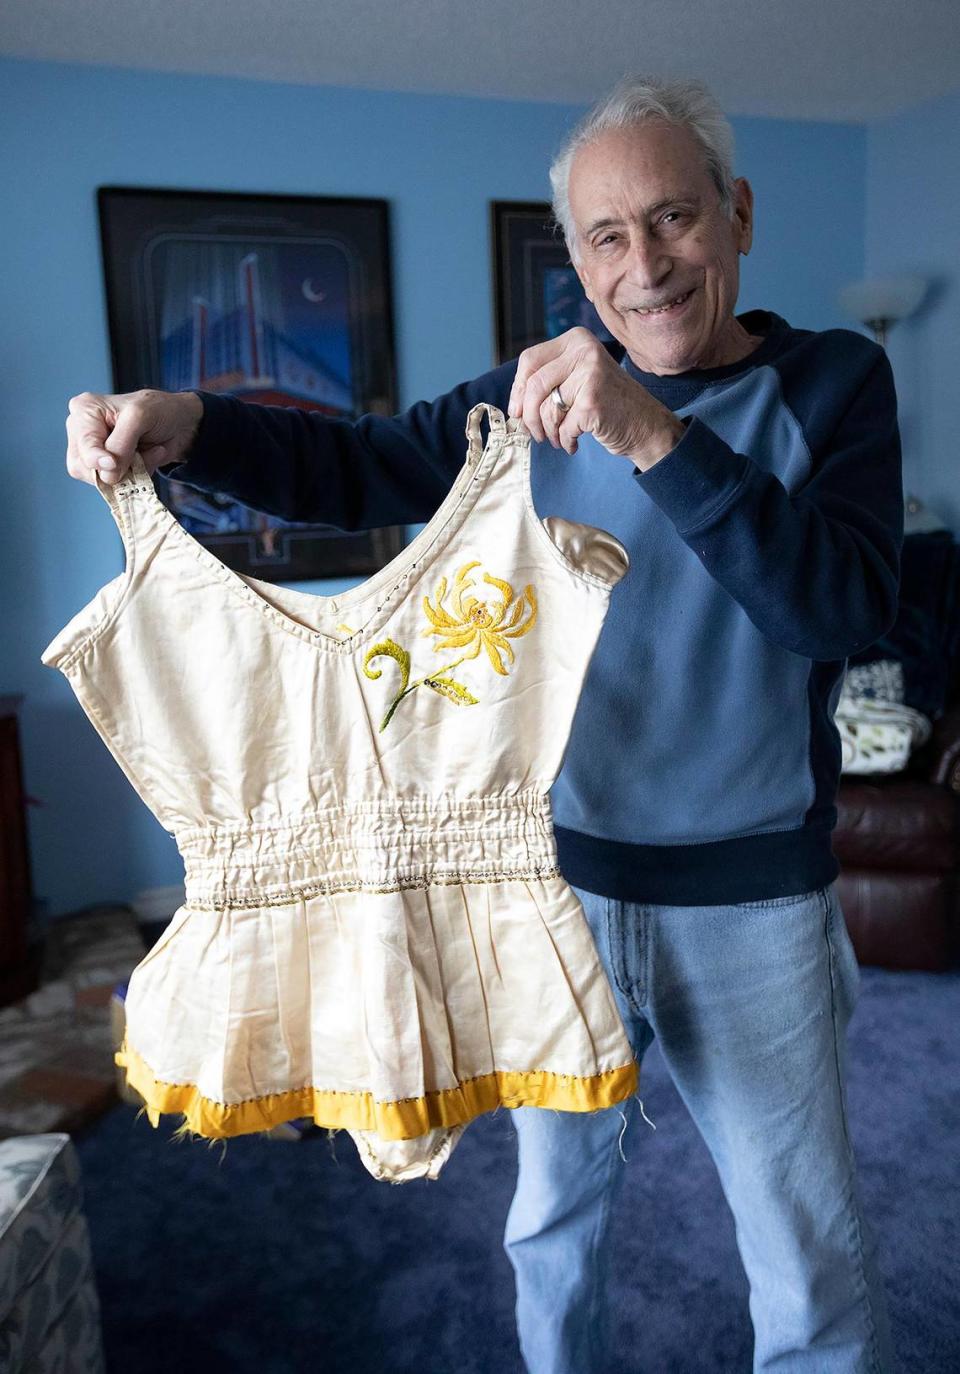 In early January 2022, Jim Major found a box in the basement of his Cambria home that was filled with a trove of early 1900s circus memorabilia from his grandparents, who performed worldwide but mostly in New Zealand and Australia. Here, Major holds an outfit his grandmother wore in the circus.